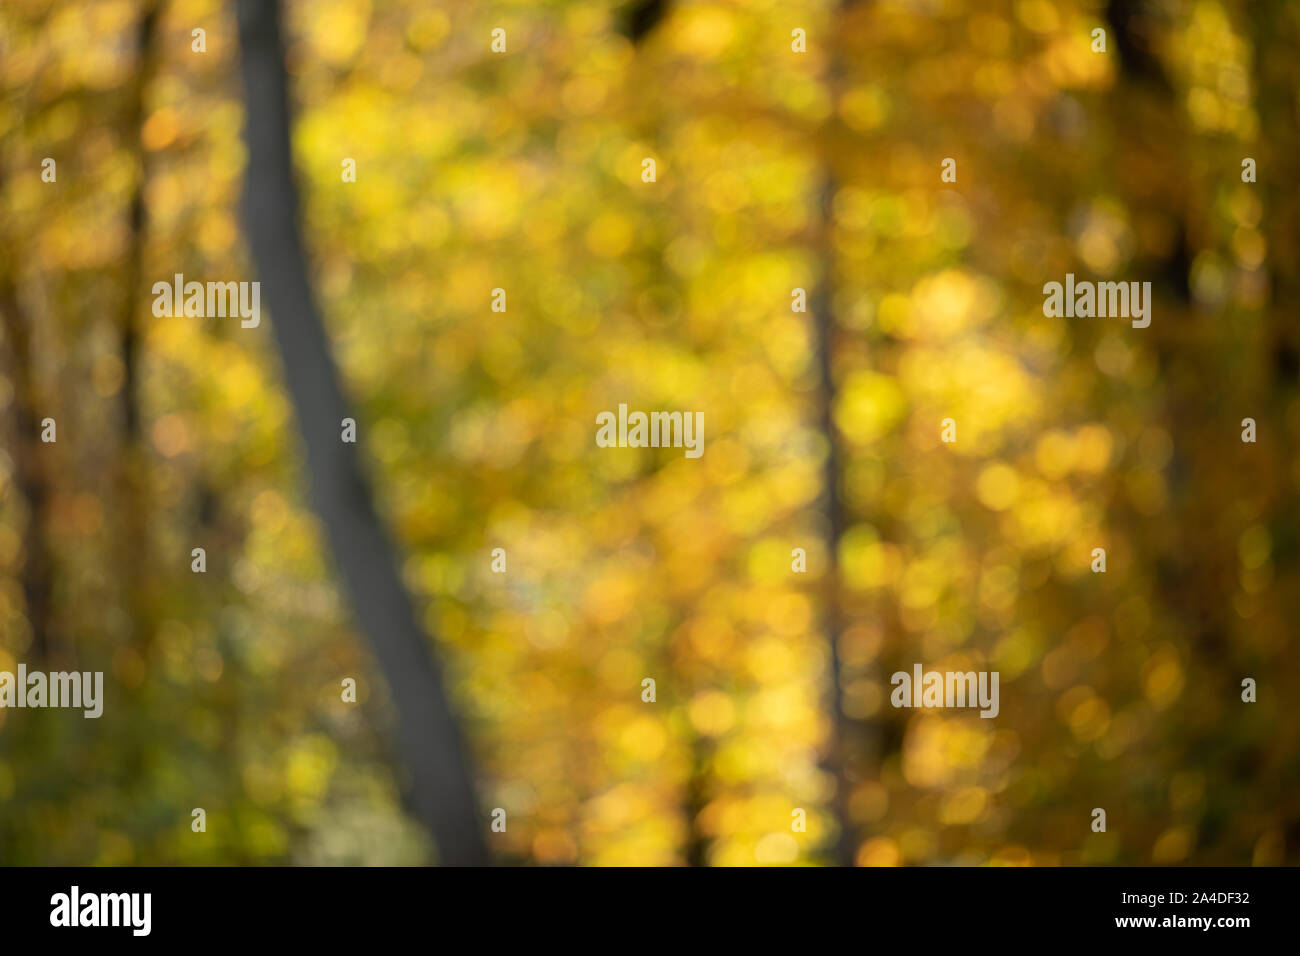 Abstract autumn tree background blurred, out of focus on bright. Stock Photo